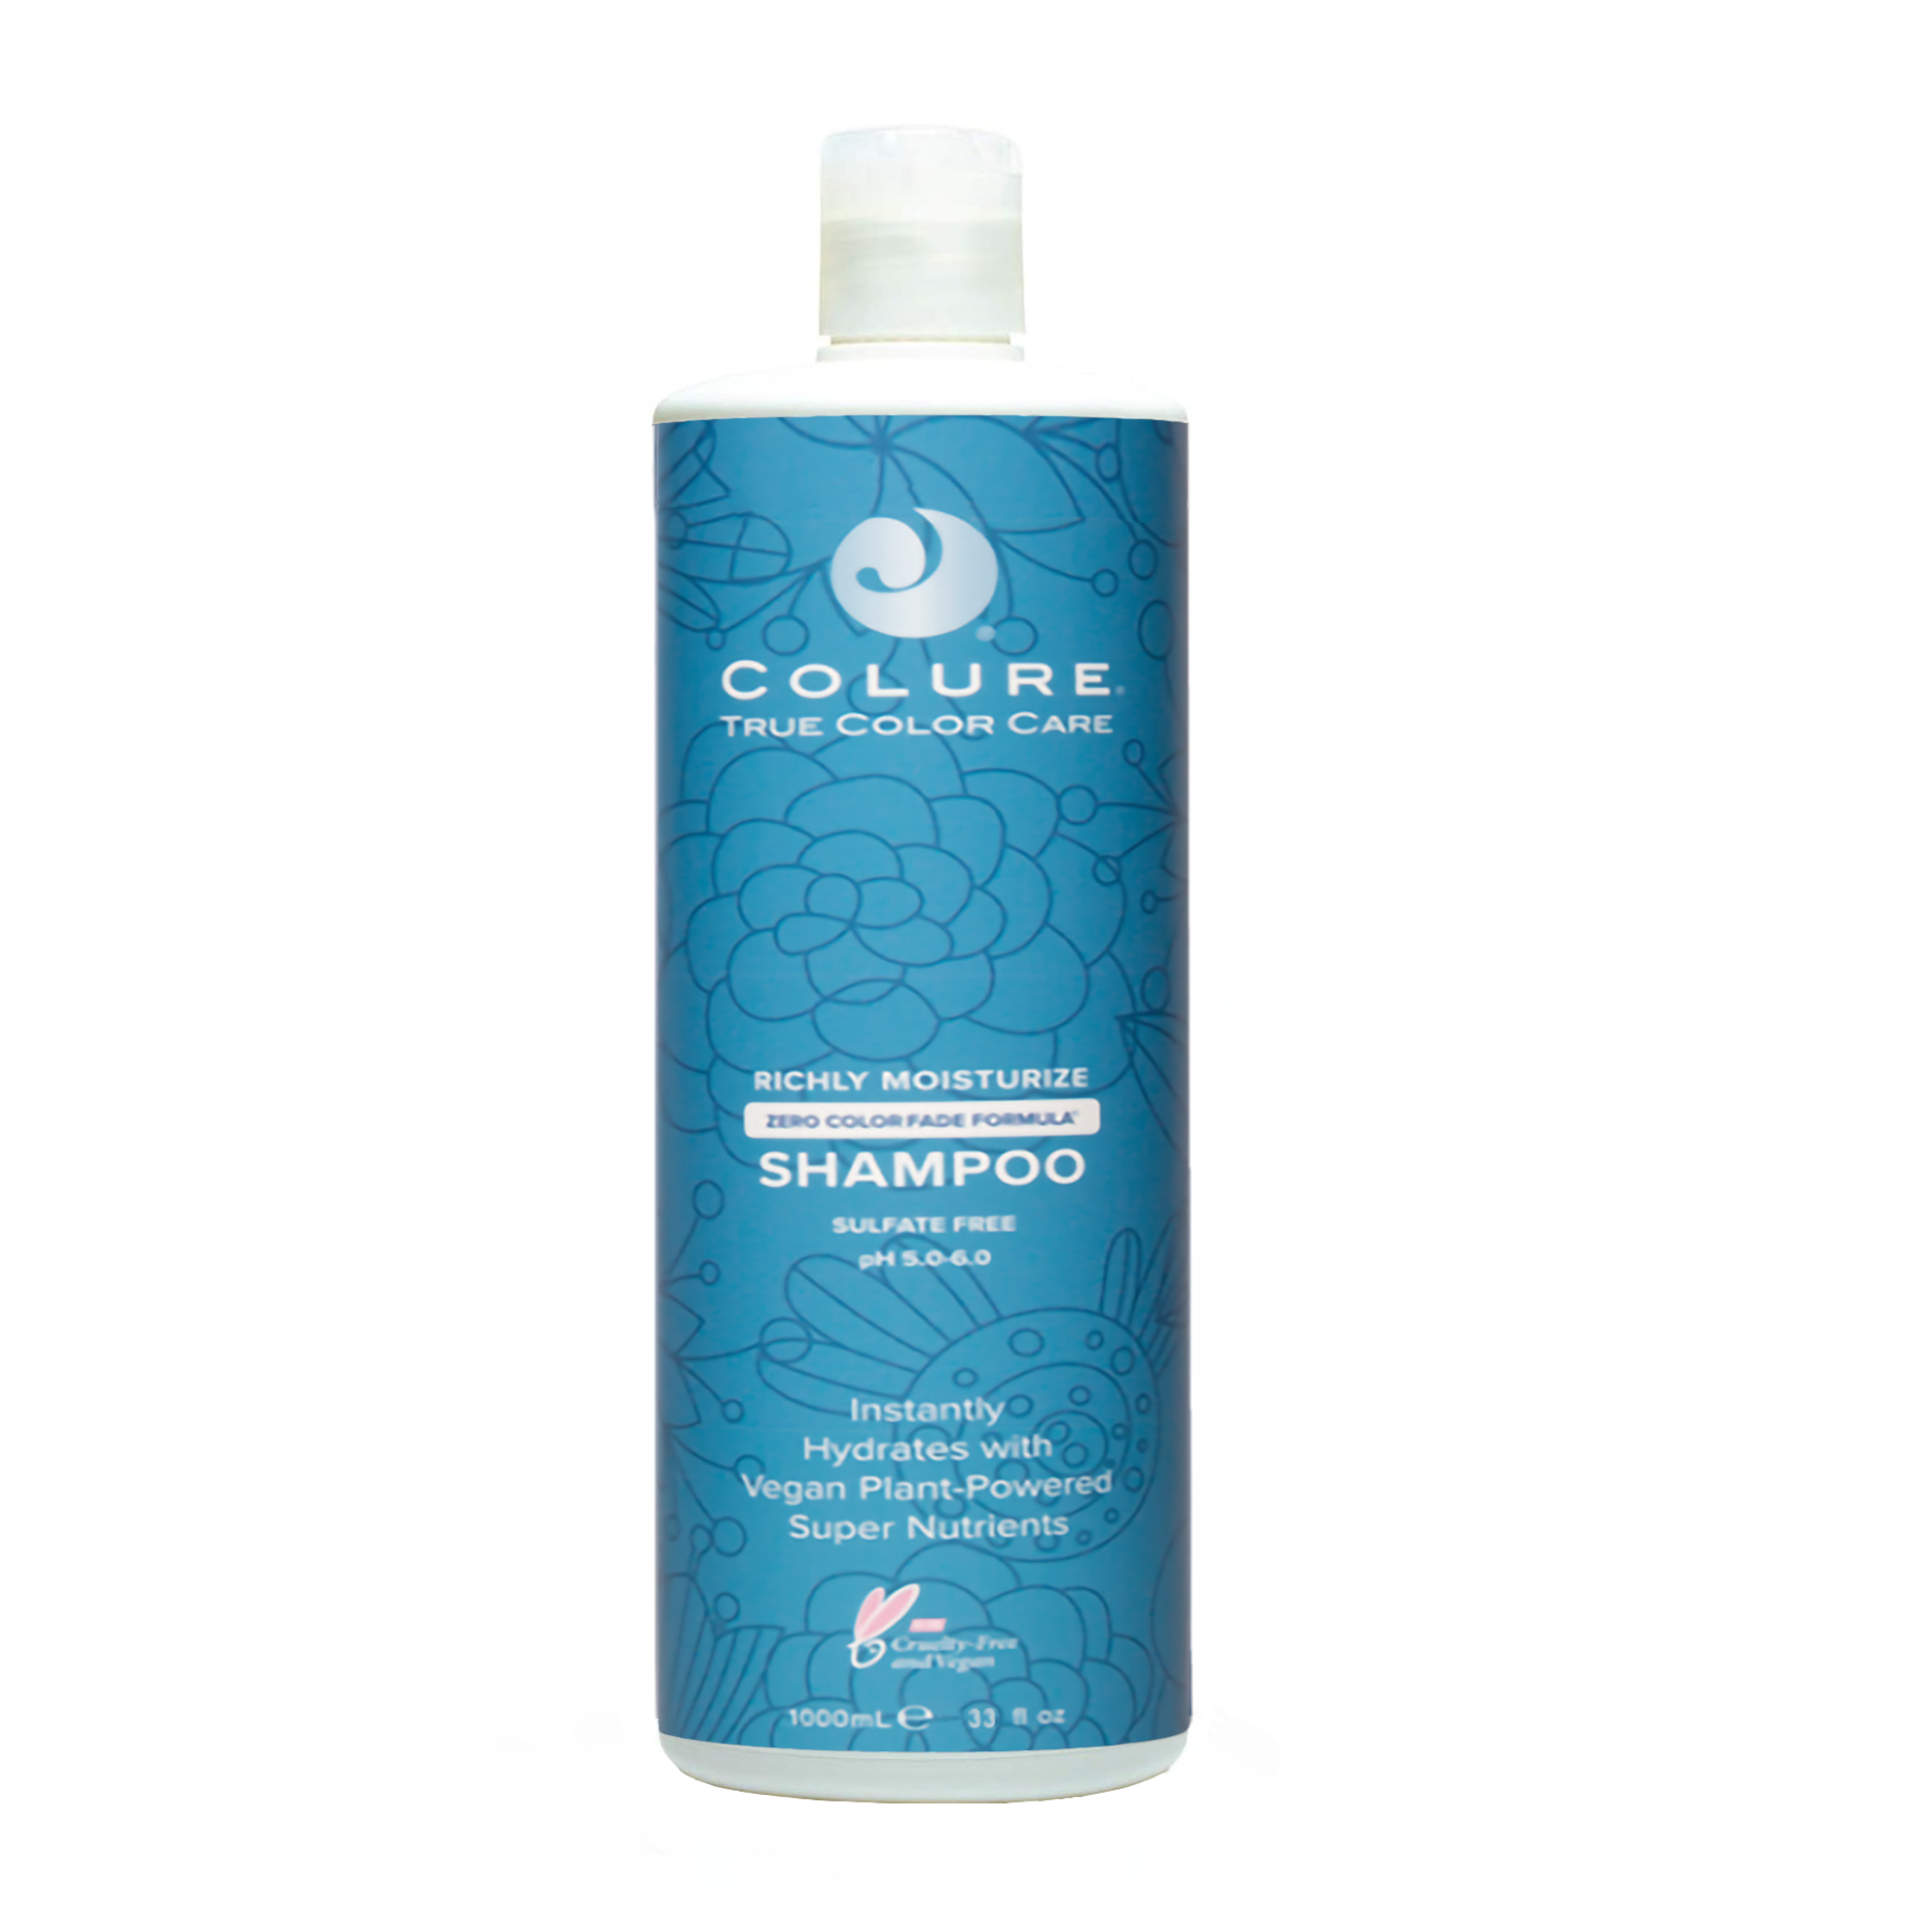 Colure Richly Moisturizing Shampoo and Conditioner Duo 33 oz ($104 Value) / LITER